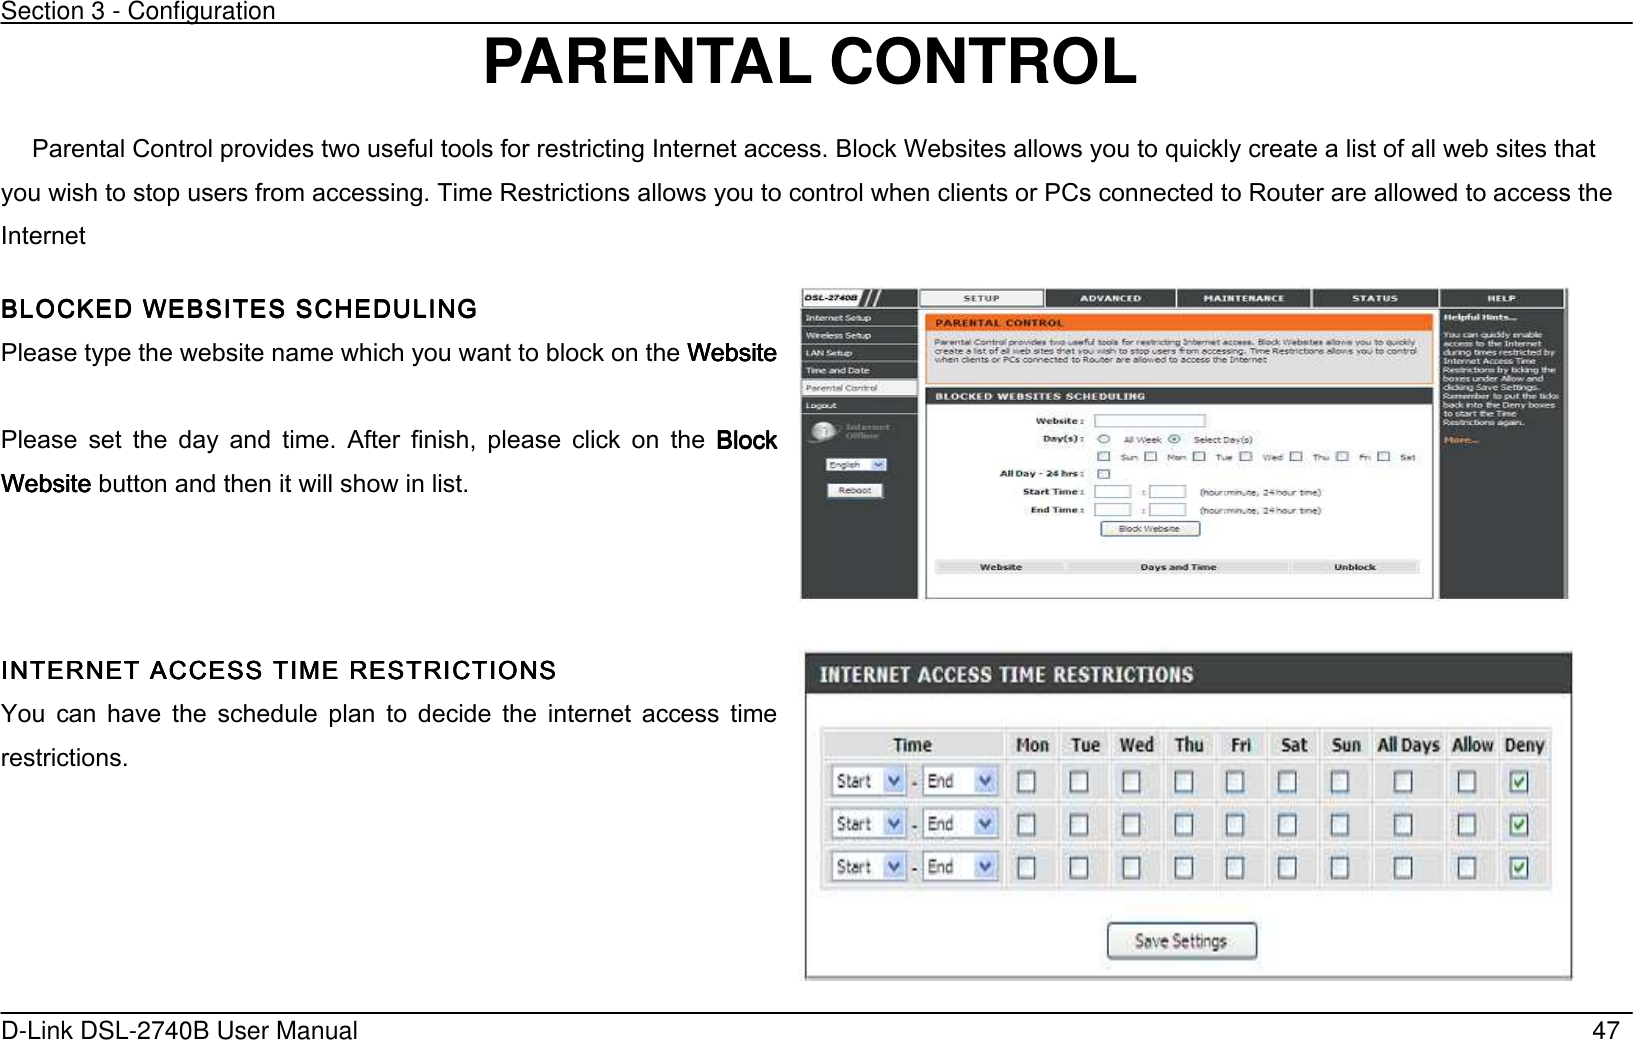 Section 3 - Configuration   D-Link DSL-2740B User Manual                                                  47 PARENTAL CONTROL  Parental Control provides two useful tools for restricting Internet access. Block Websites allows you to quickly create a list of all web sites that you wish to stop users from accessing. Time Restrictions allows you to control when clients or PCs connected to Router are allowed to access the Internet BLOCKED WEBSITES SCHBLOCKED WEBSITES SCHBLOCKED WEBSITES SCHBLOCKED WEBSITES SCHEDULING EDULING EDULING EDULING      Please type the website name which you want to block on the WebsiteWebsiteWebsiteWebsite     Please  set  the  day  and  time.  After  finish,  please  click  on  the  Block Block Block Block WebsiteWebsiteWebsiteWebsite    button and then it will show in list.   INTERNET ACCESS TIMEINTERNET ACCESS TIMEINTERNET ACCESS TIMEINTERNET ACCESS TIME RESTRICTIONS    RESTRICTIONS    RESTRICTIONS    RESTRICTIONS        You  can  have  the  schedule  plan  to  decide  the  internet  access  time restrictions.   